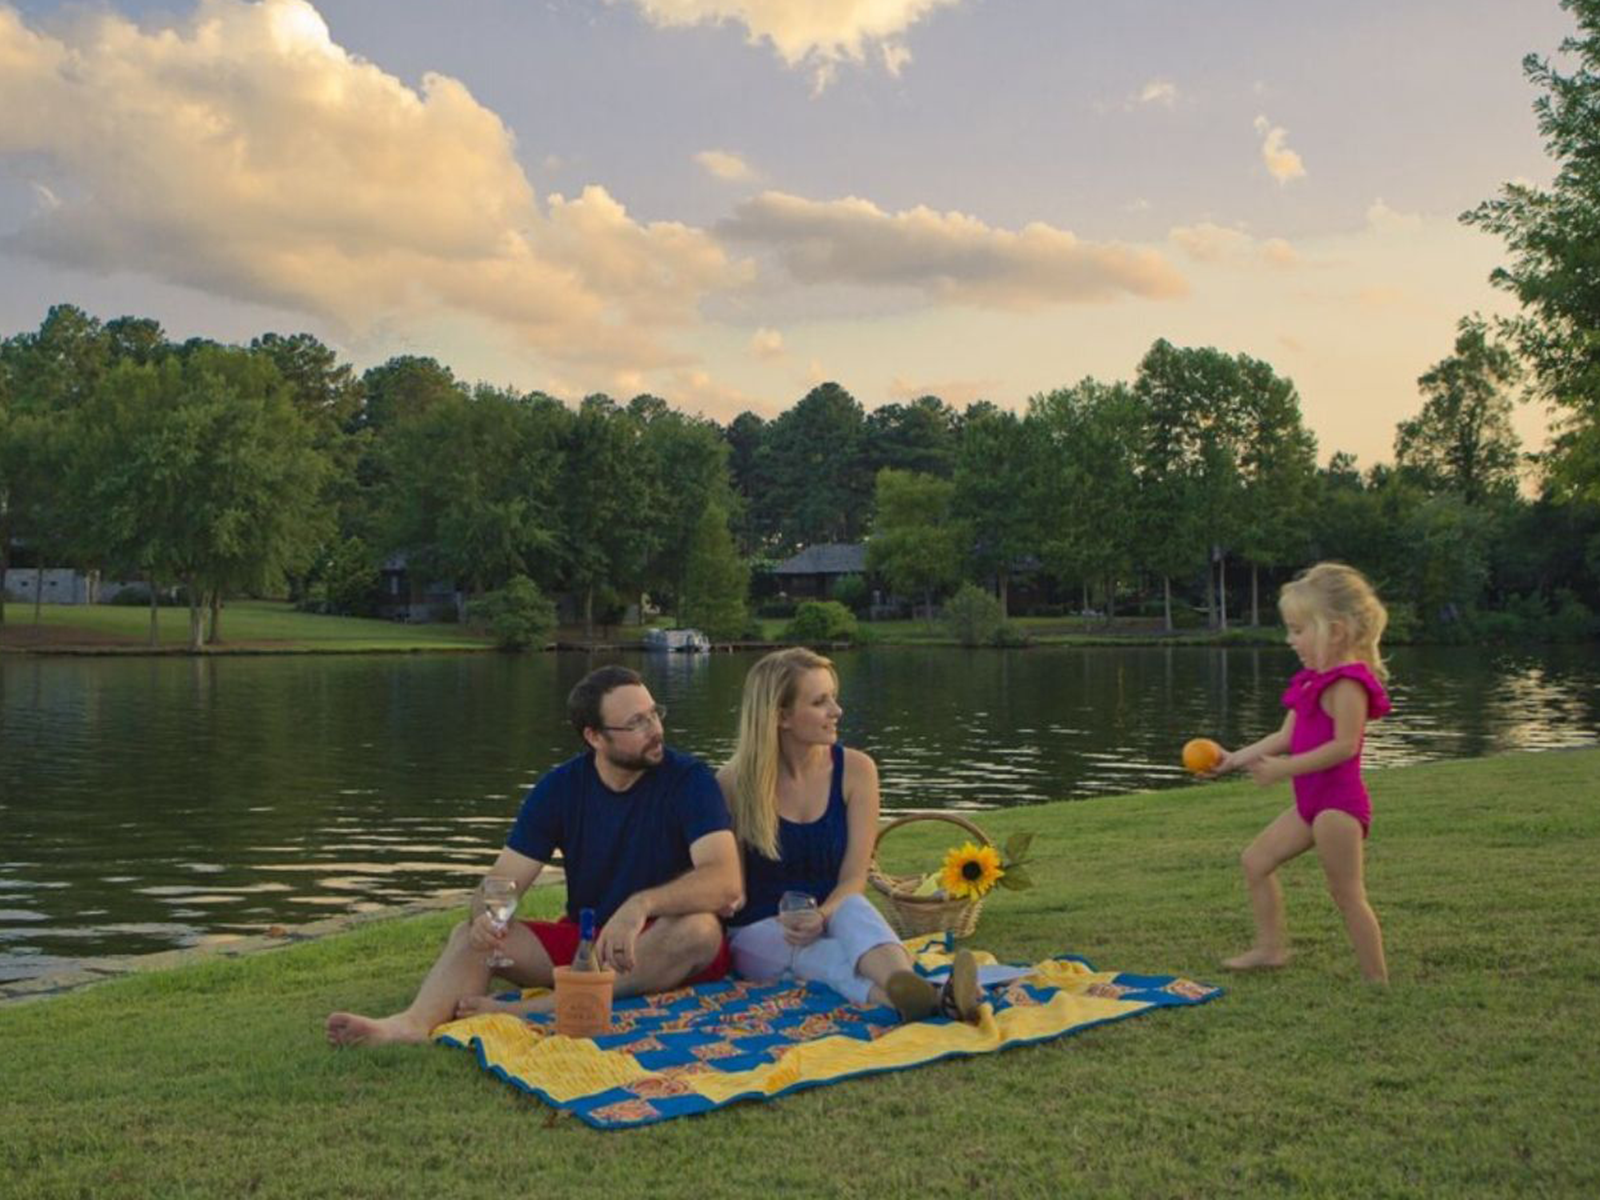 Family enjoys a picnic at sunset at Lake Oconee | Georgia Attractions | Things to Do in Madison Georgia | Visit Madison GA